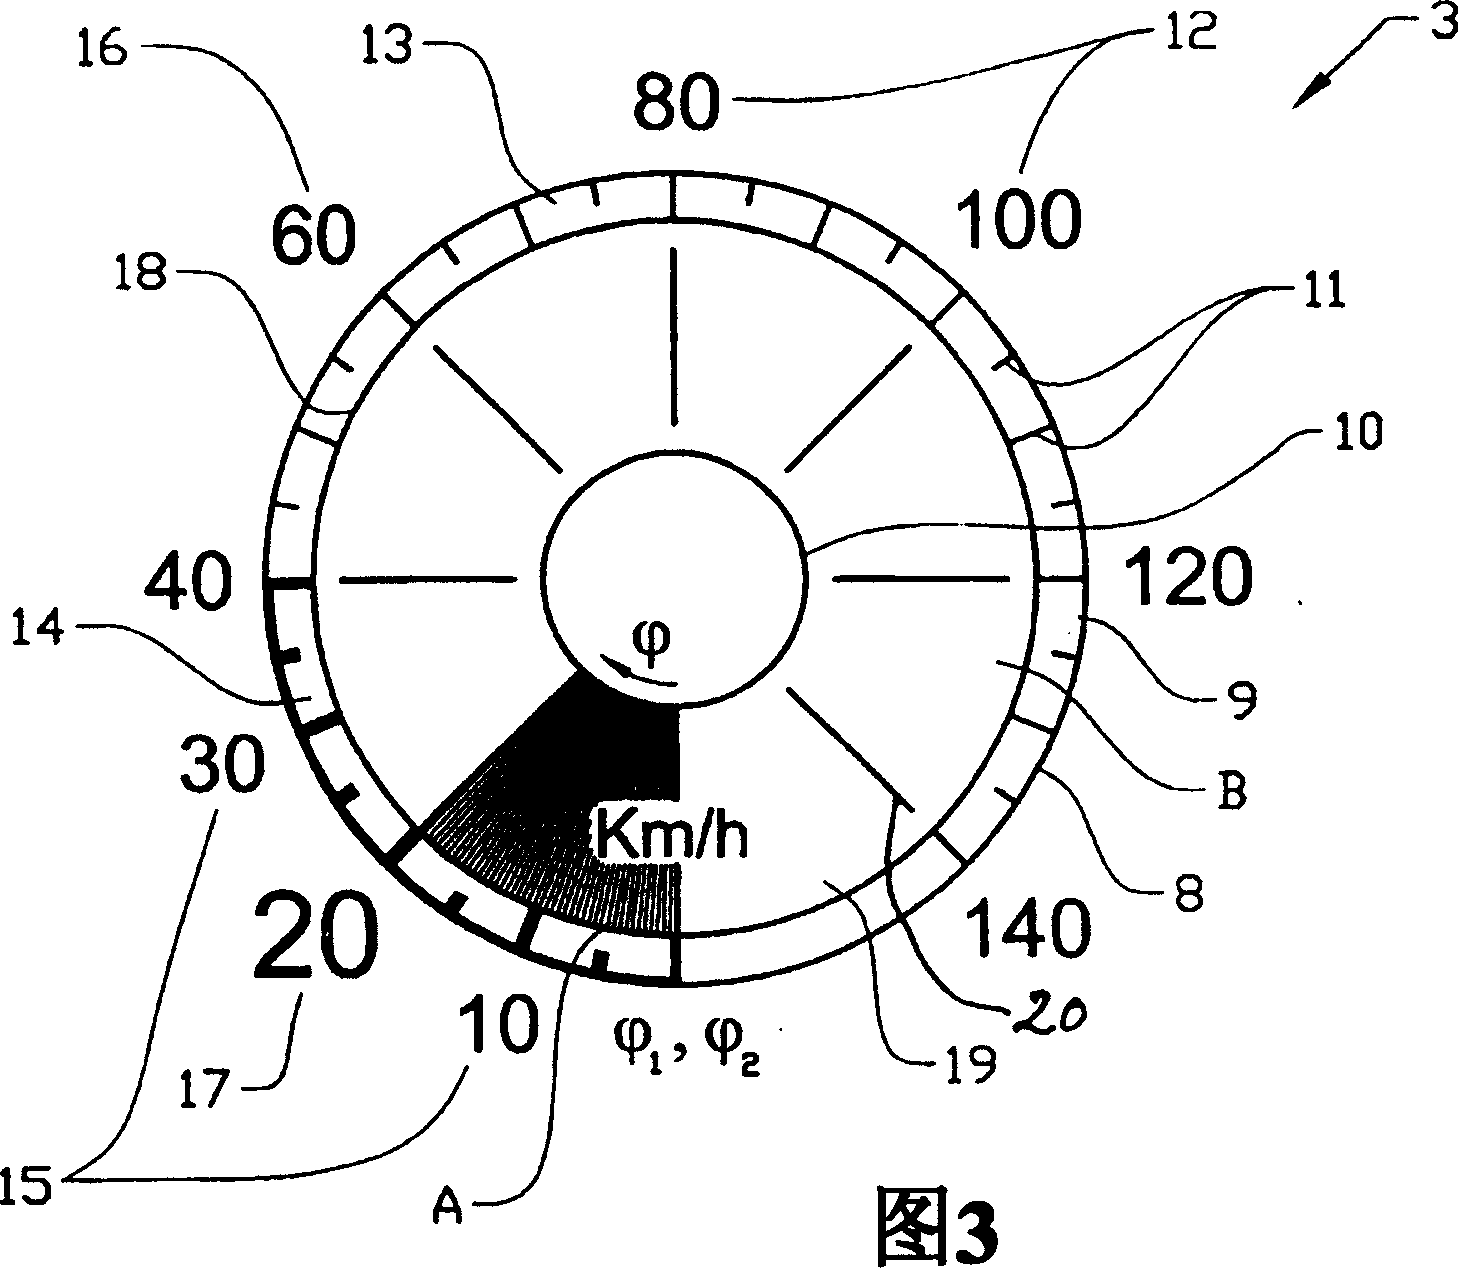 Device for indicating an operational state of a vehicle